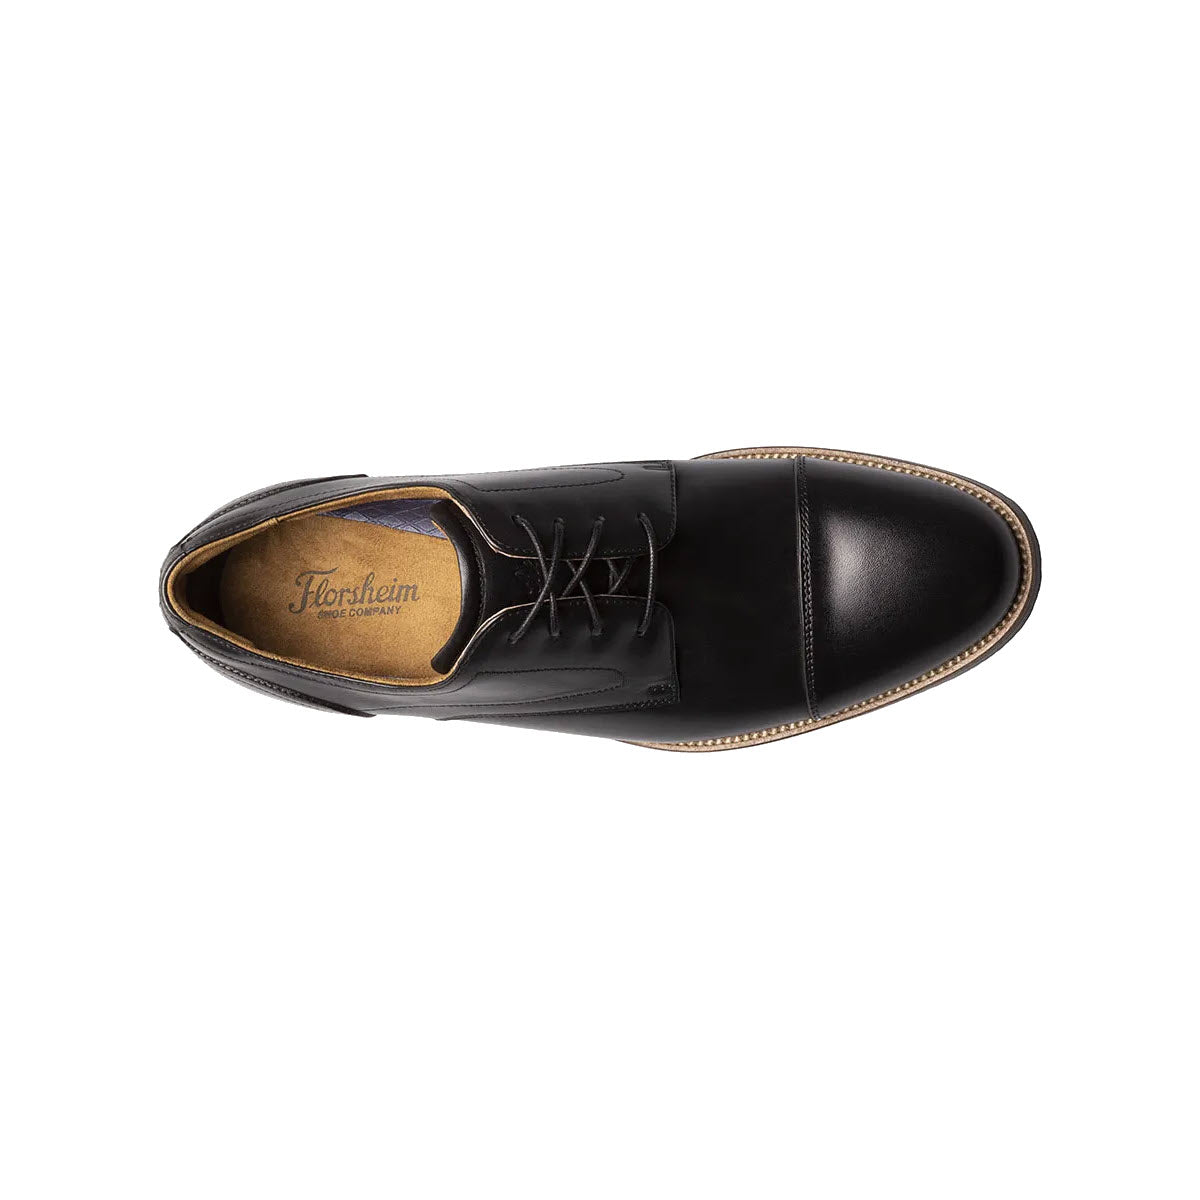 Top view of a single black leather Florsheim FLORSHEIM RUCCI CAP TOE OXFORD BLACK - MENS with laces, featuring gold interior branding.